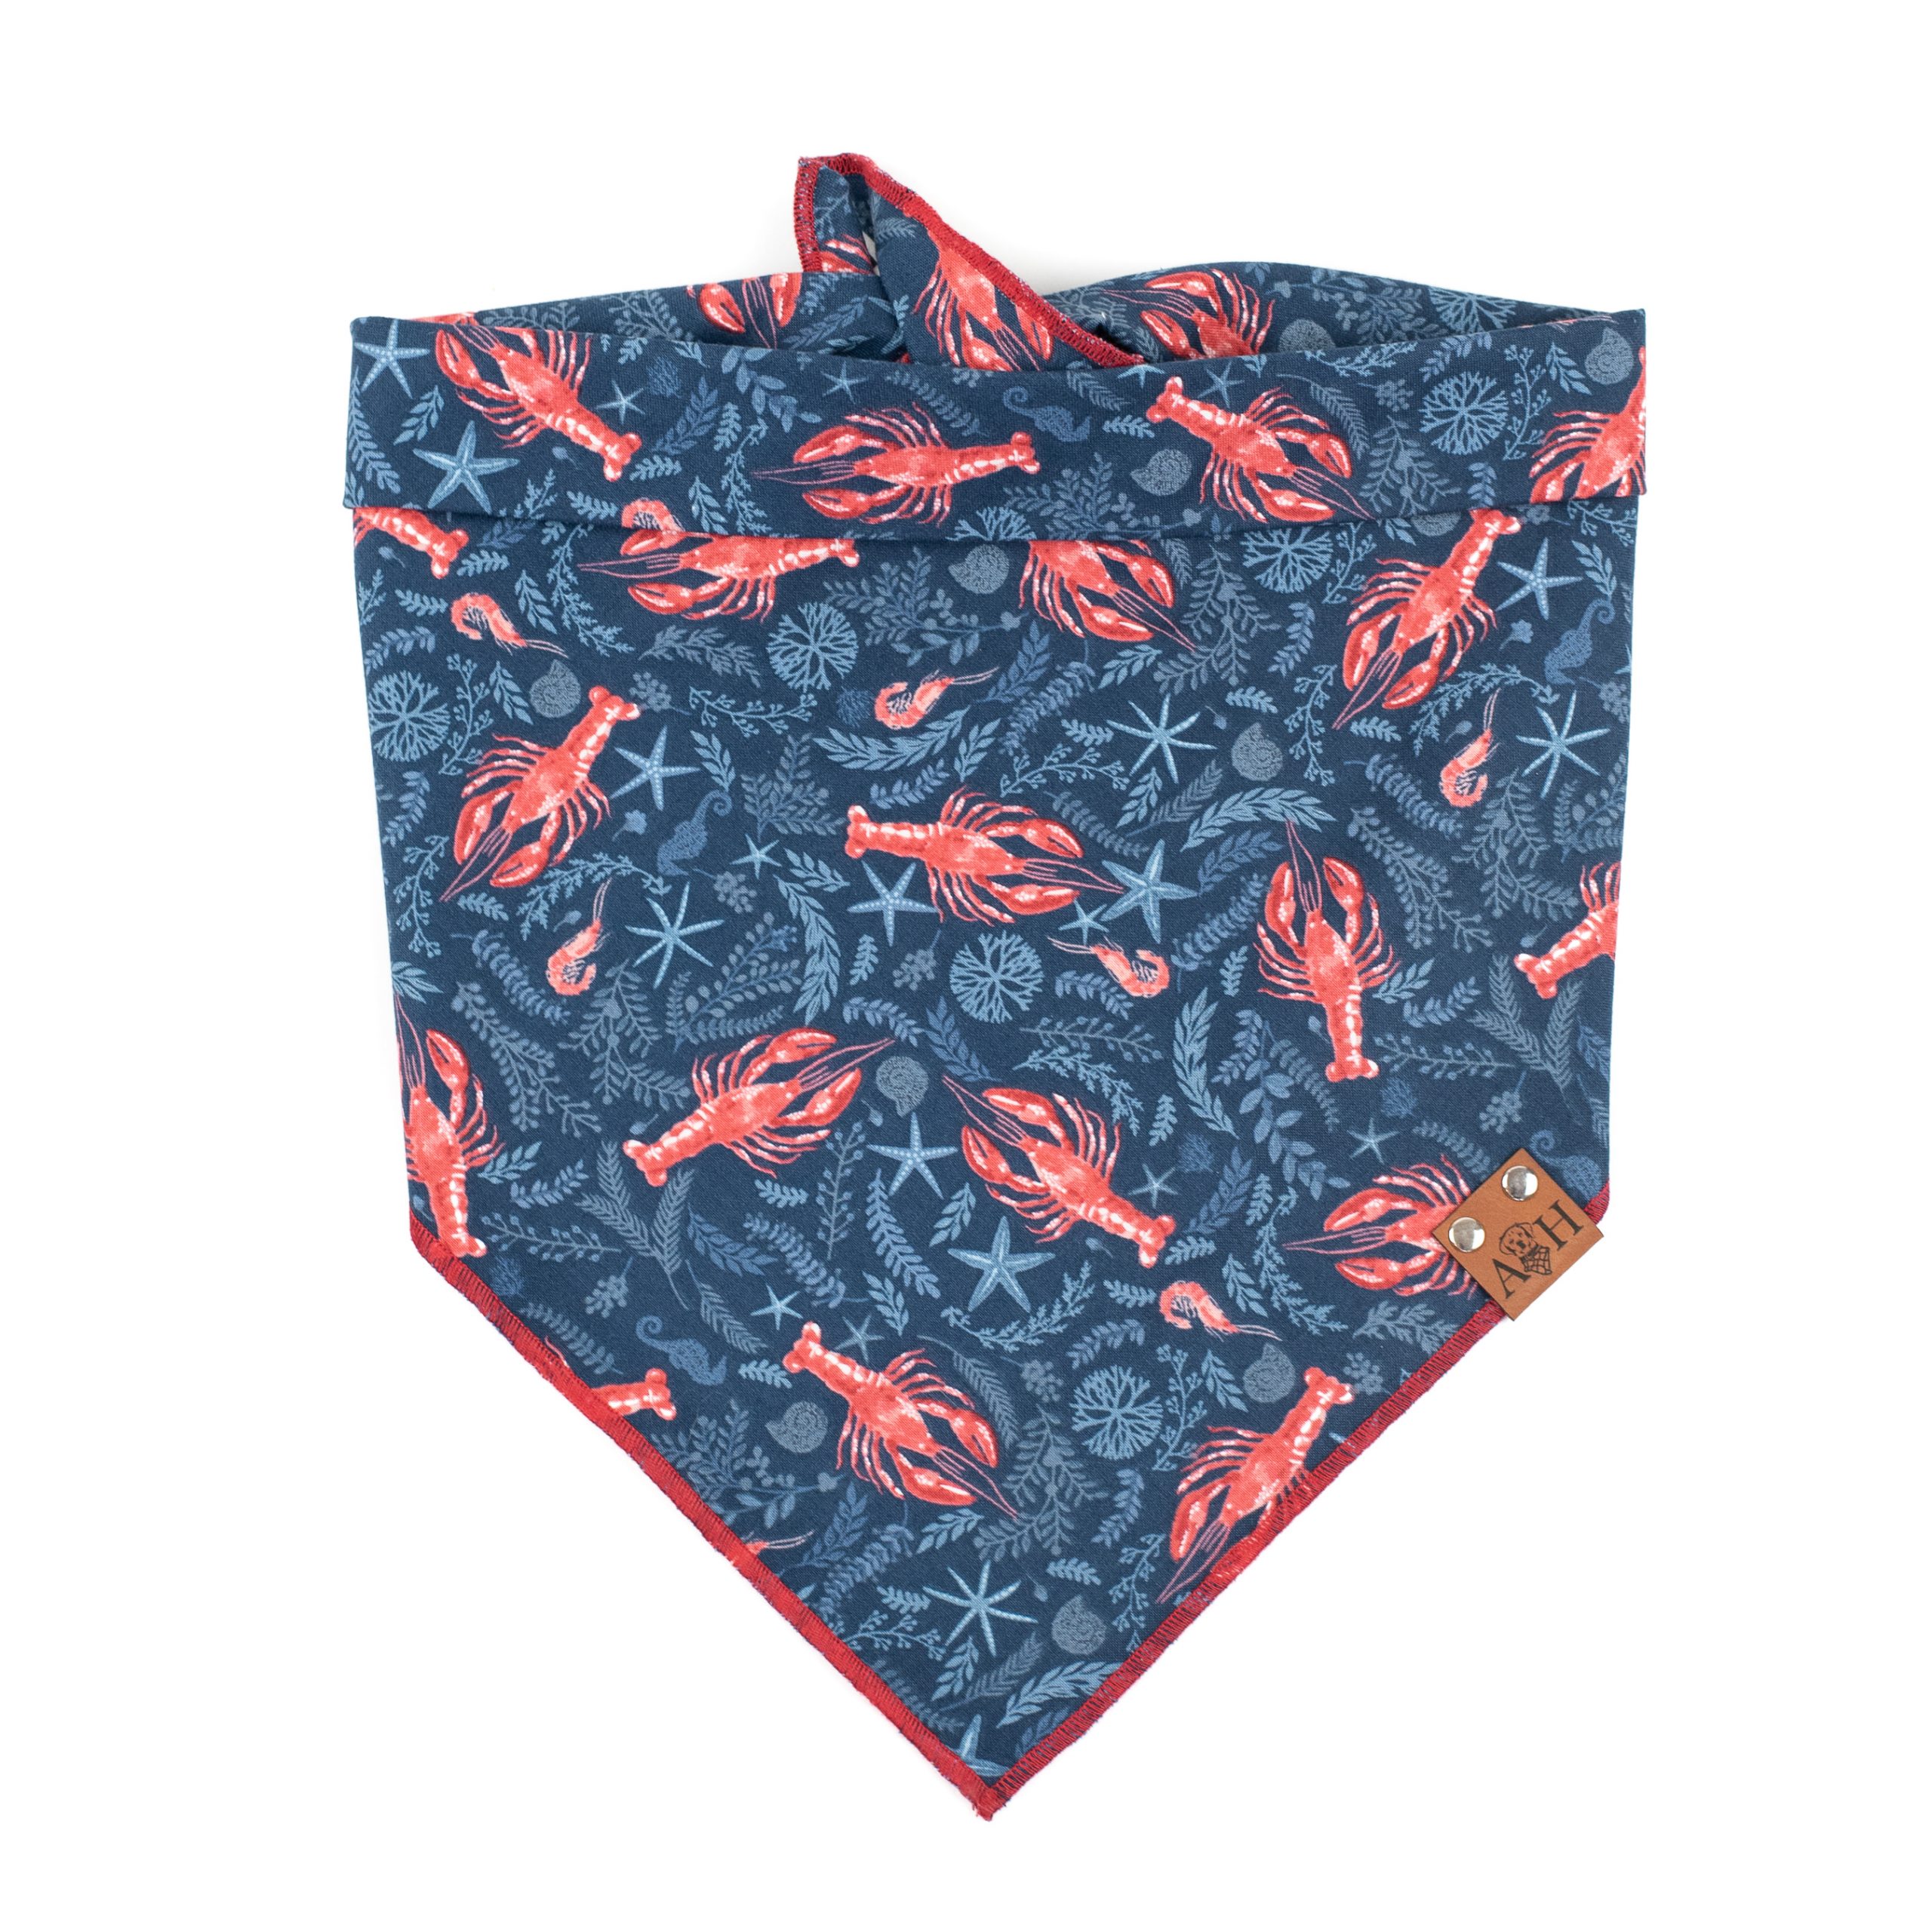 Lobster dog bandana with navy background, red lobsters and other ocean themes